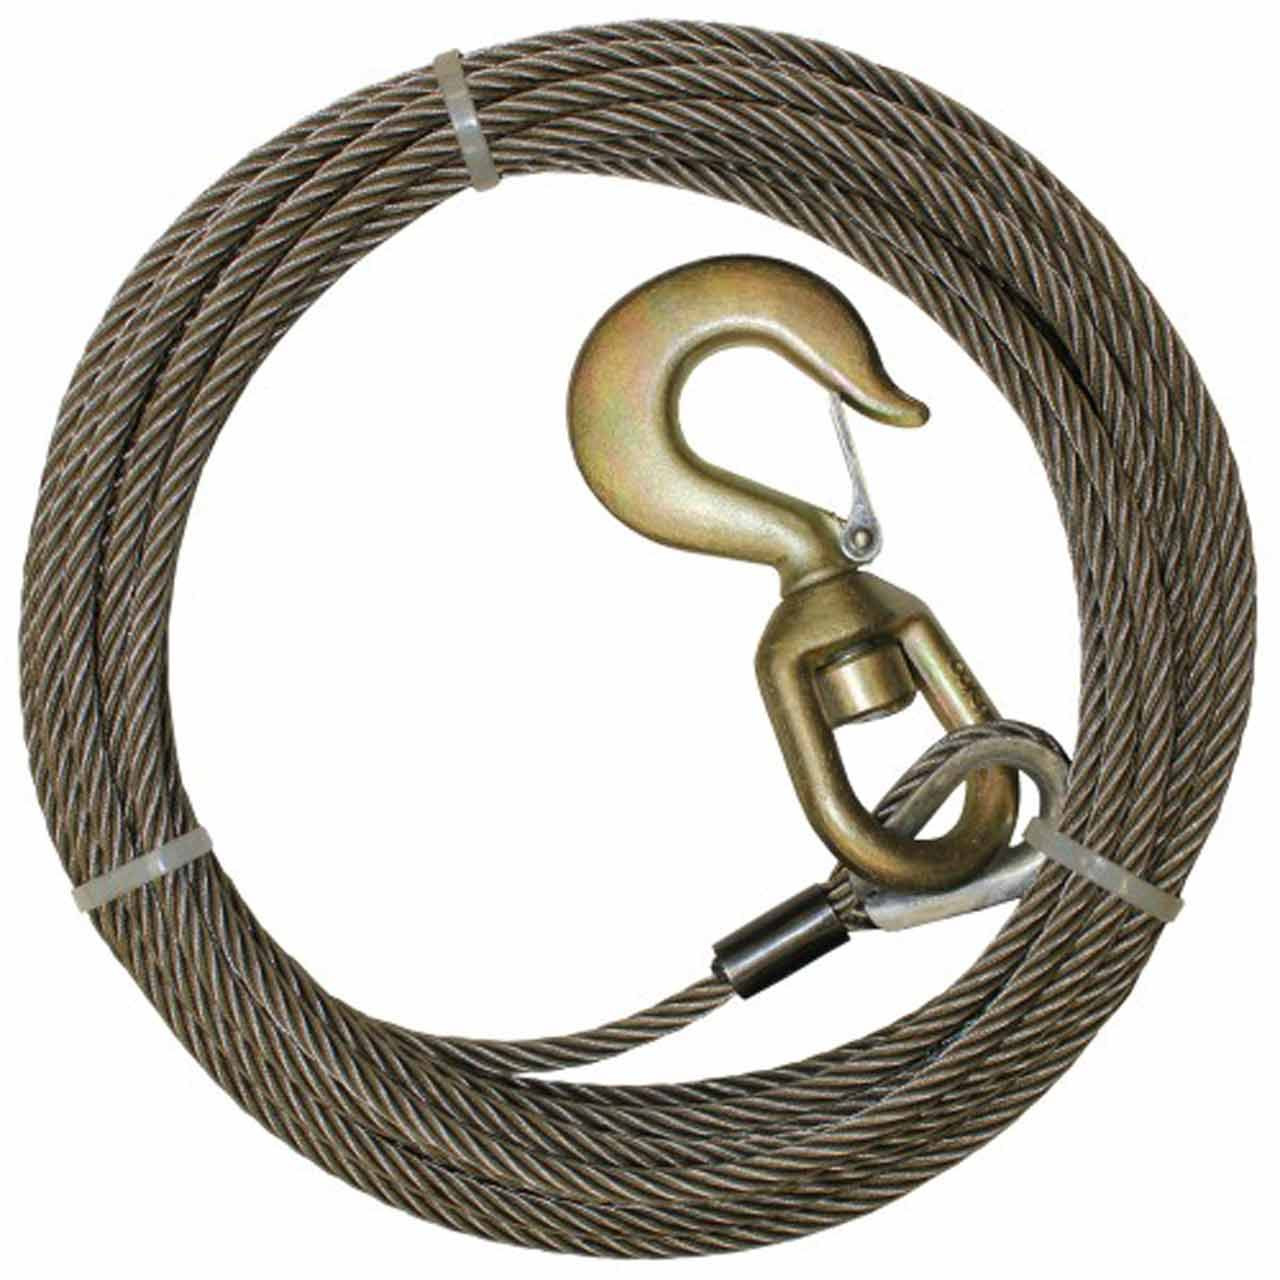 B/A Products Co. 7/16 Steel Wire Rope Assembly w/Alloy Swivel Hook